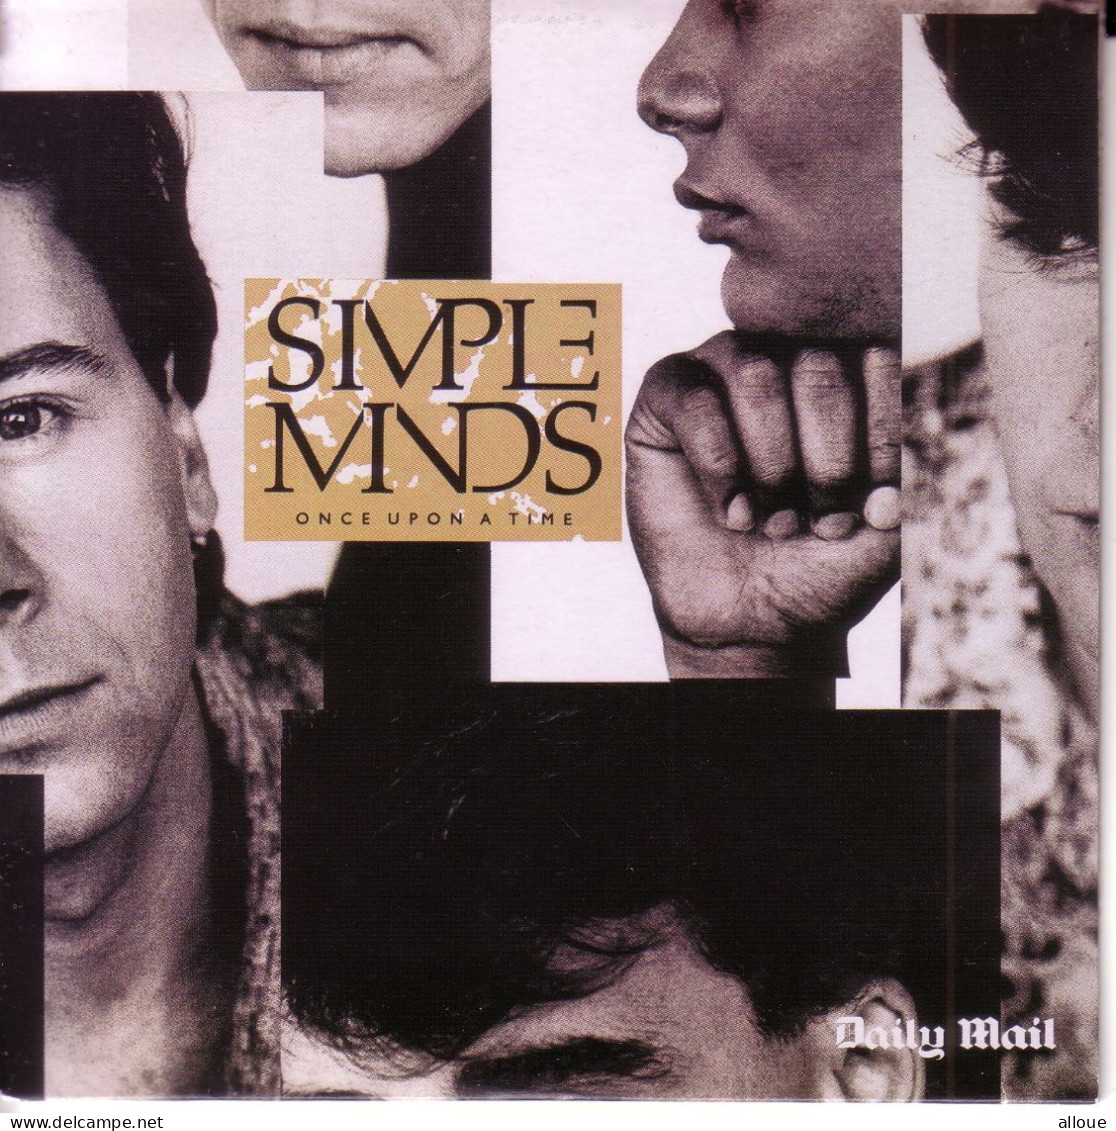 SIMPLE MINDS - ONCE UPON A TIME - CD PROMO DAILY MAIL 1985 - POCHETTE CARTON 10 TITRES - Other - English Music